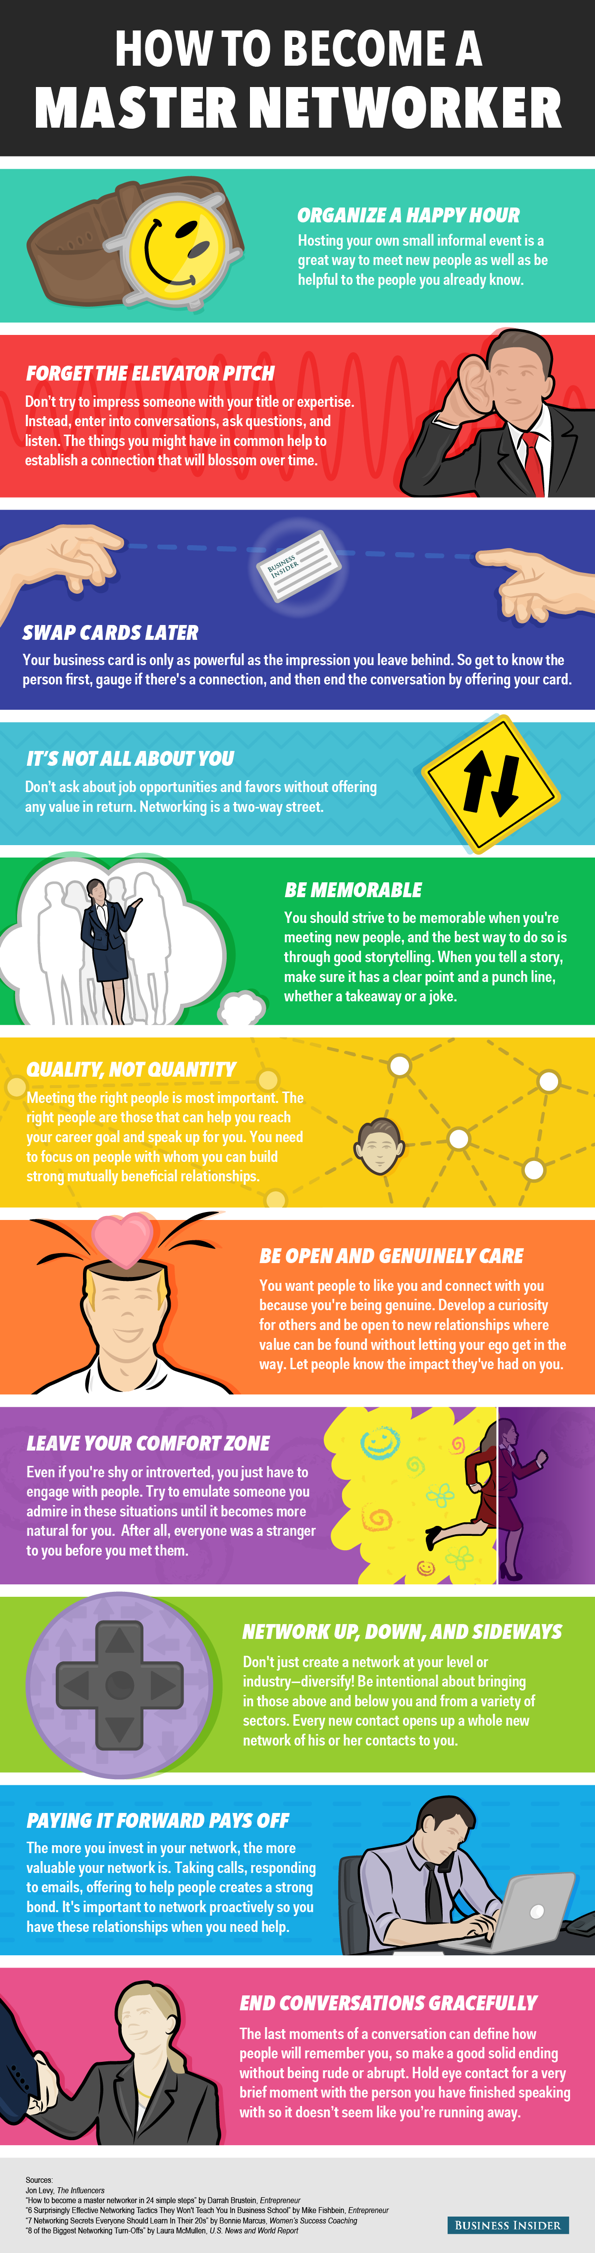 11-networking-tips-for-growing-your-business-infographic-image